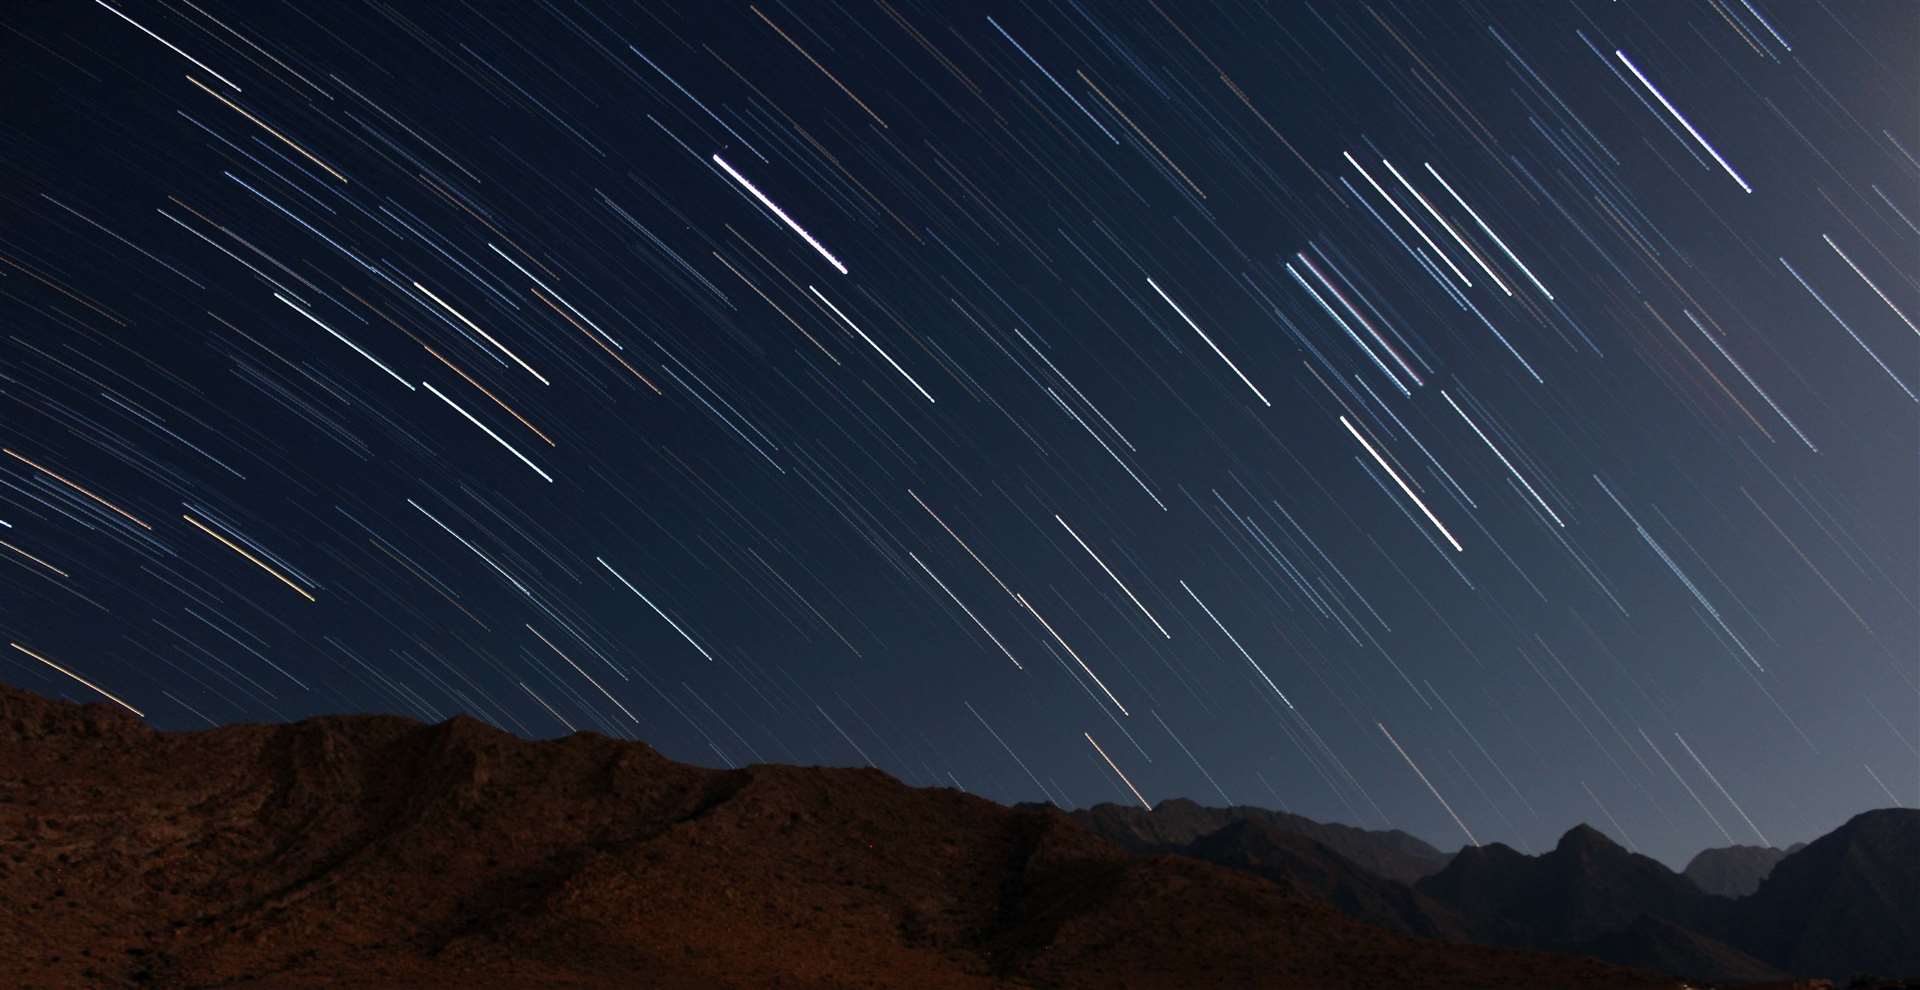 The meteor shower is going to peak on Saturday, October 8